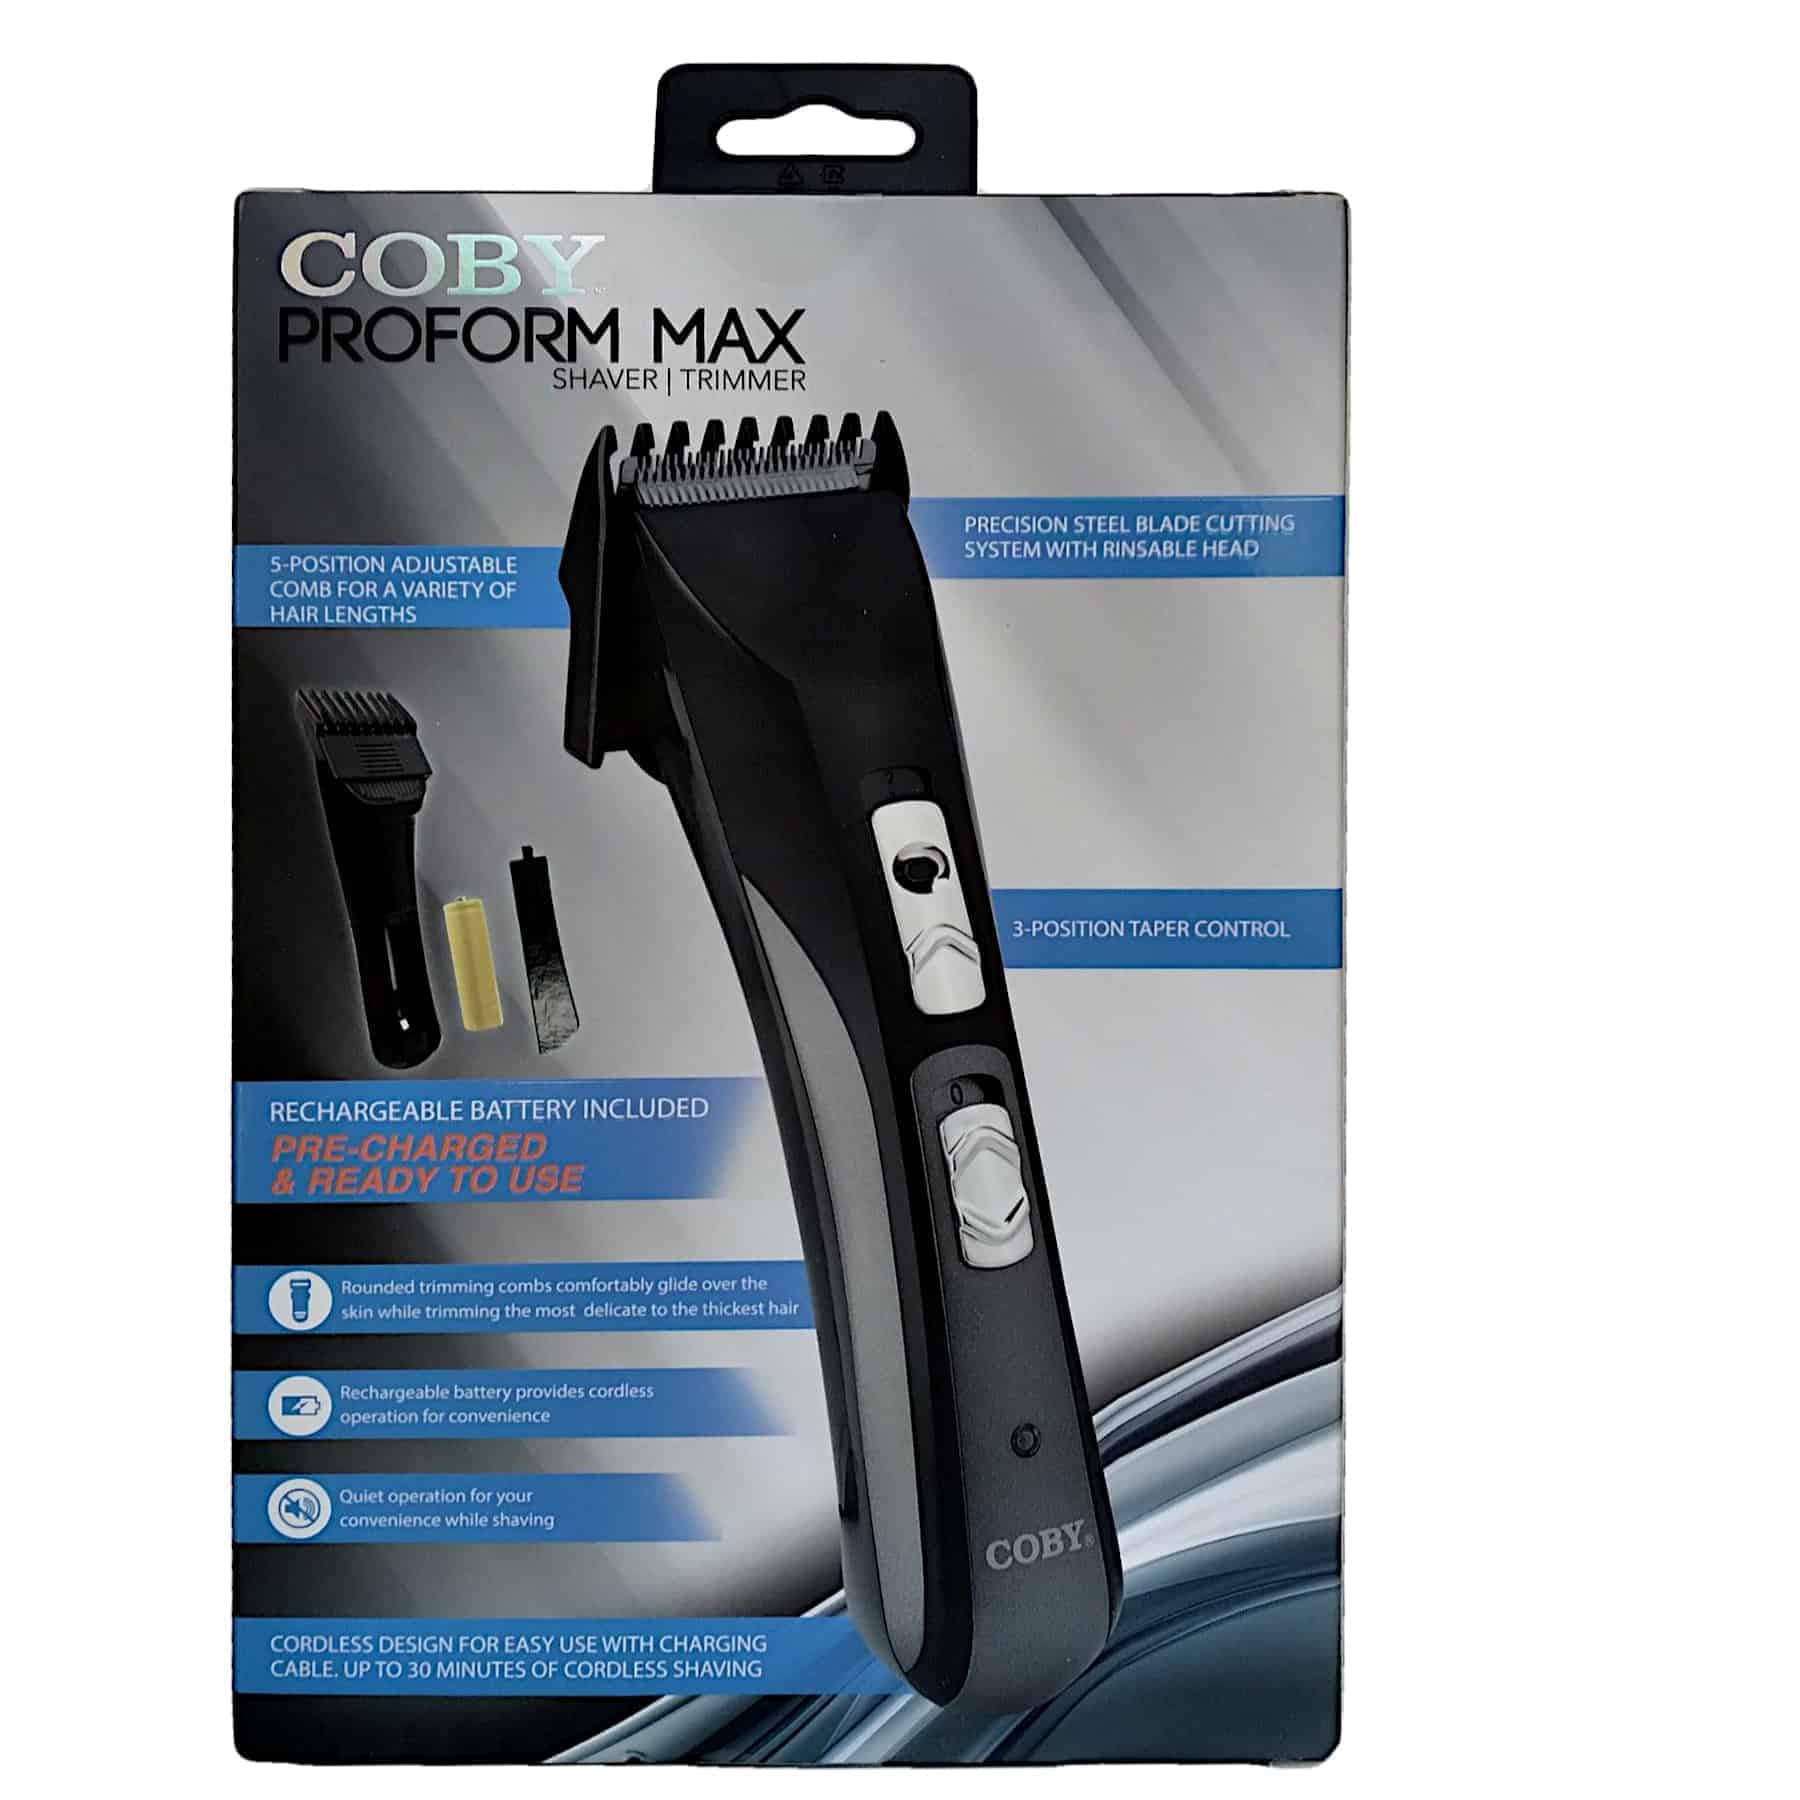 This Coby Proform Max Groomer Shaver Trimmer Cordless Rechargeable For Face And Body is made with love by Premier Homegoods! Shop more unique gift ideas today with Spots Initiatives, the best way to support creators.